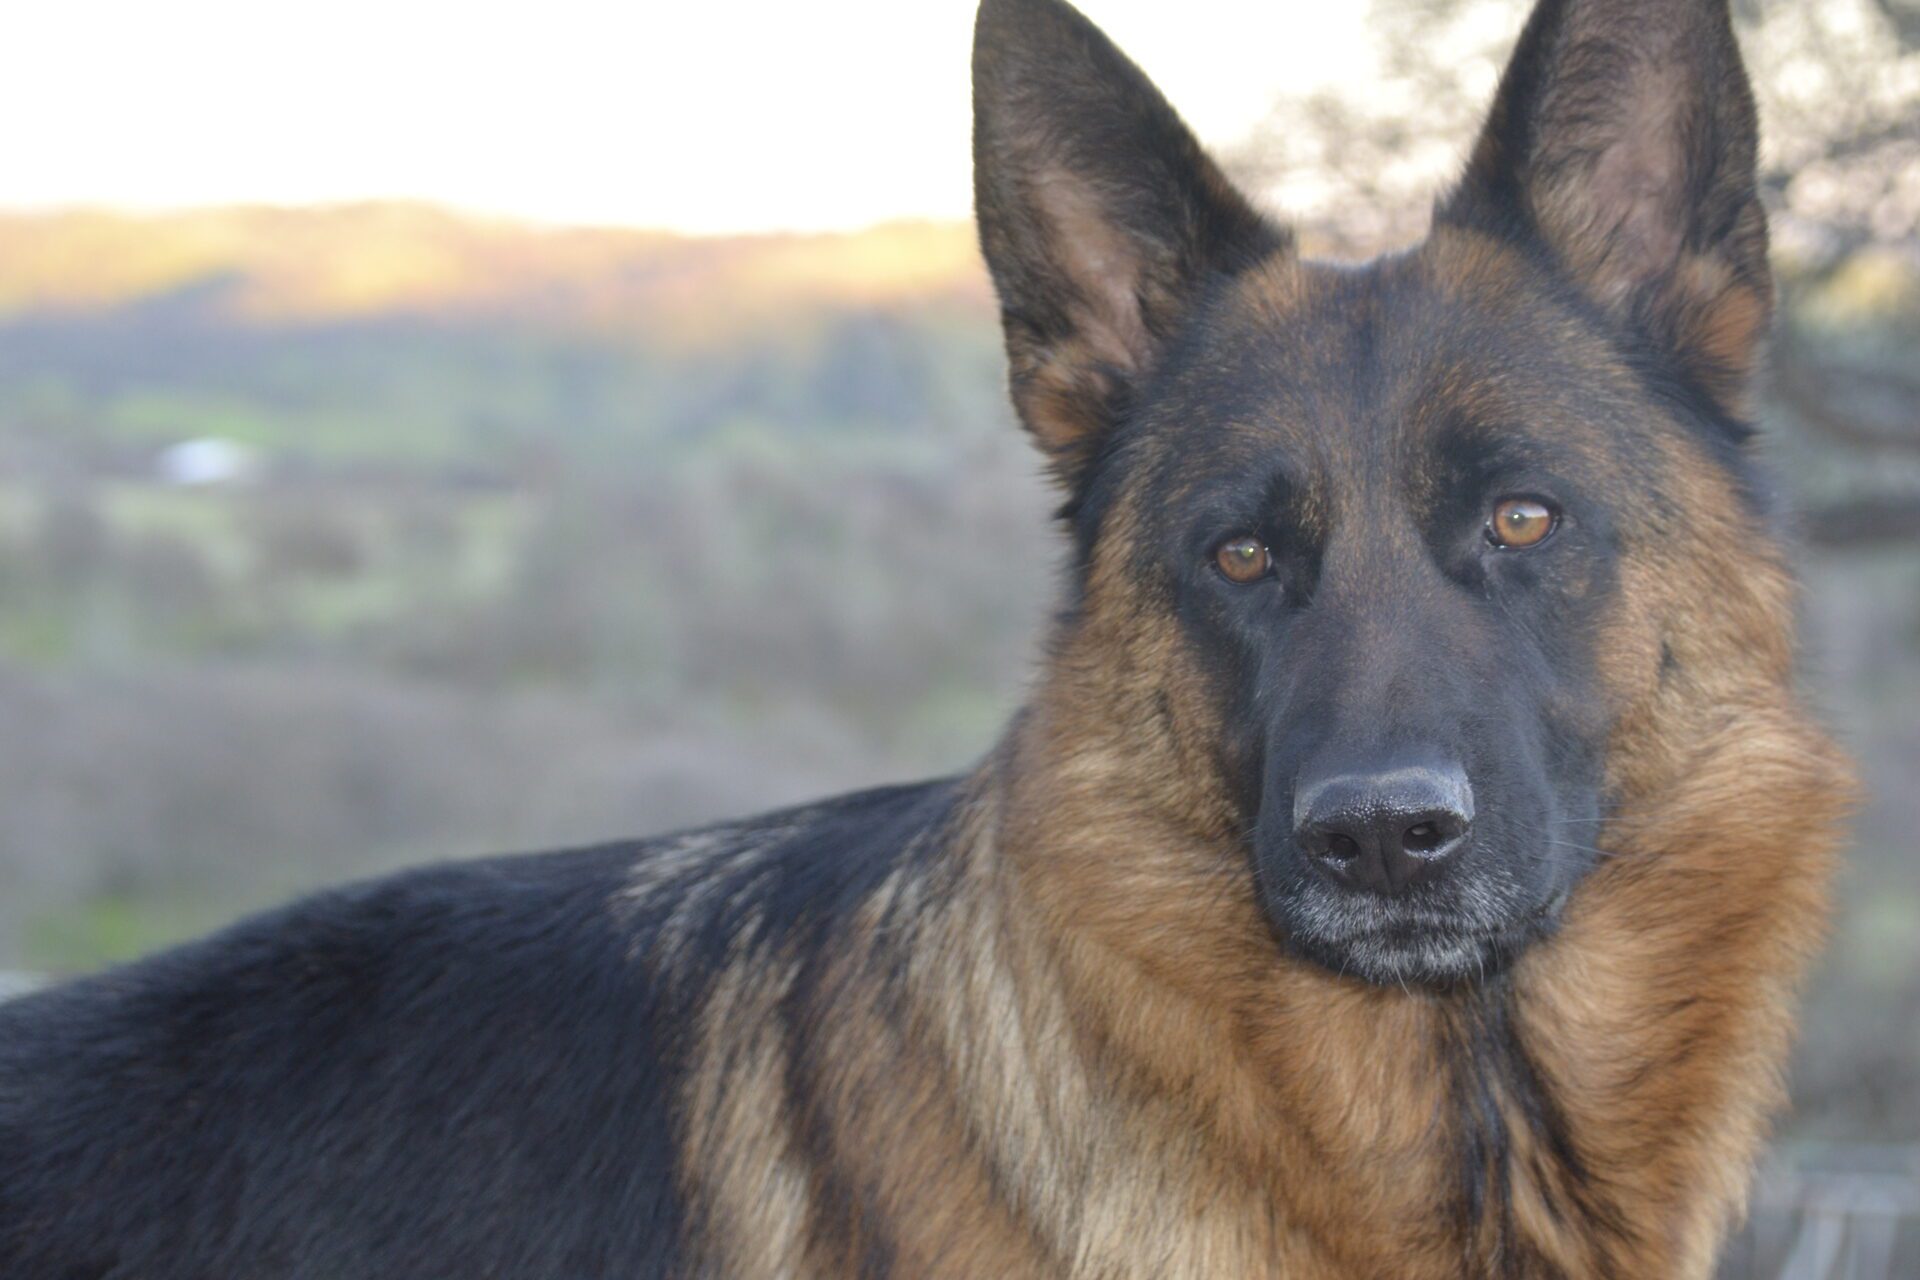 A german shepherd dog with long hair and black fur.